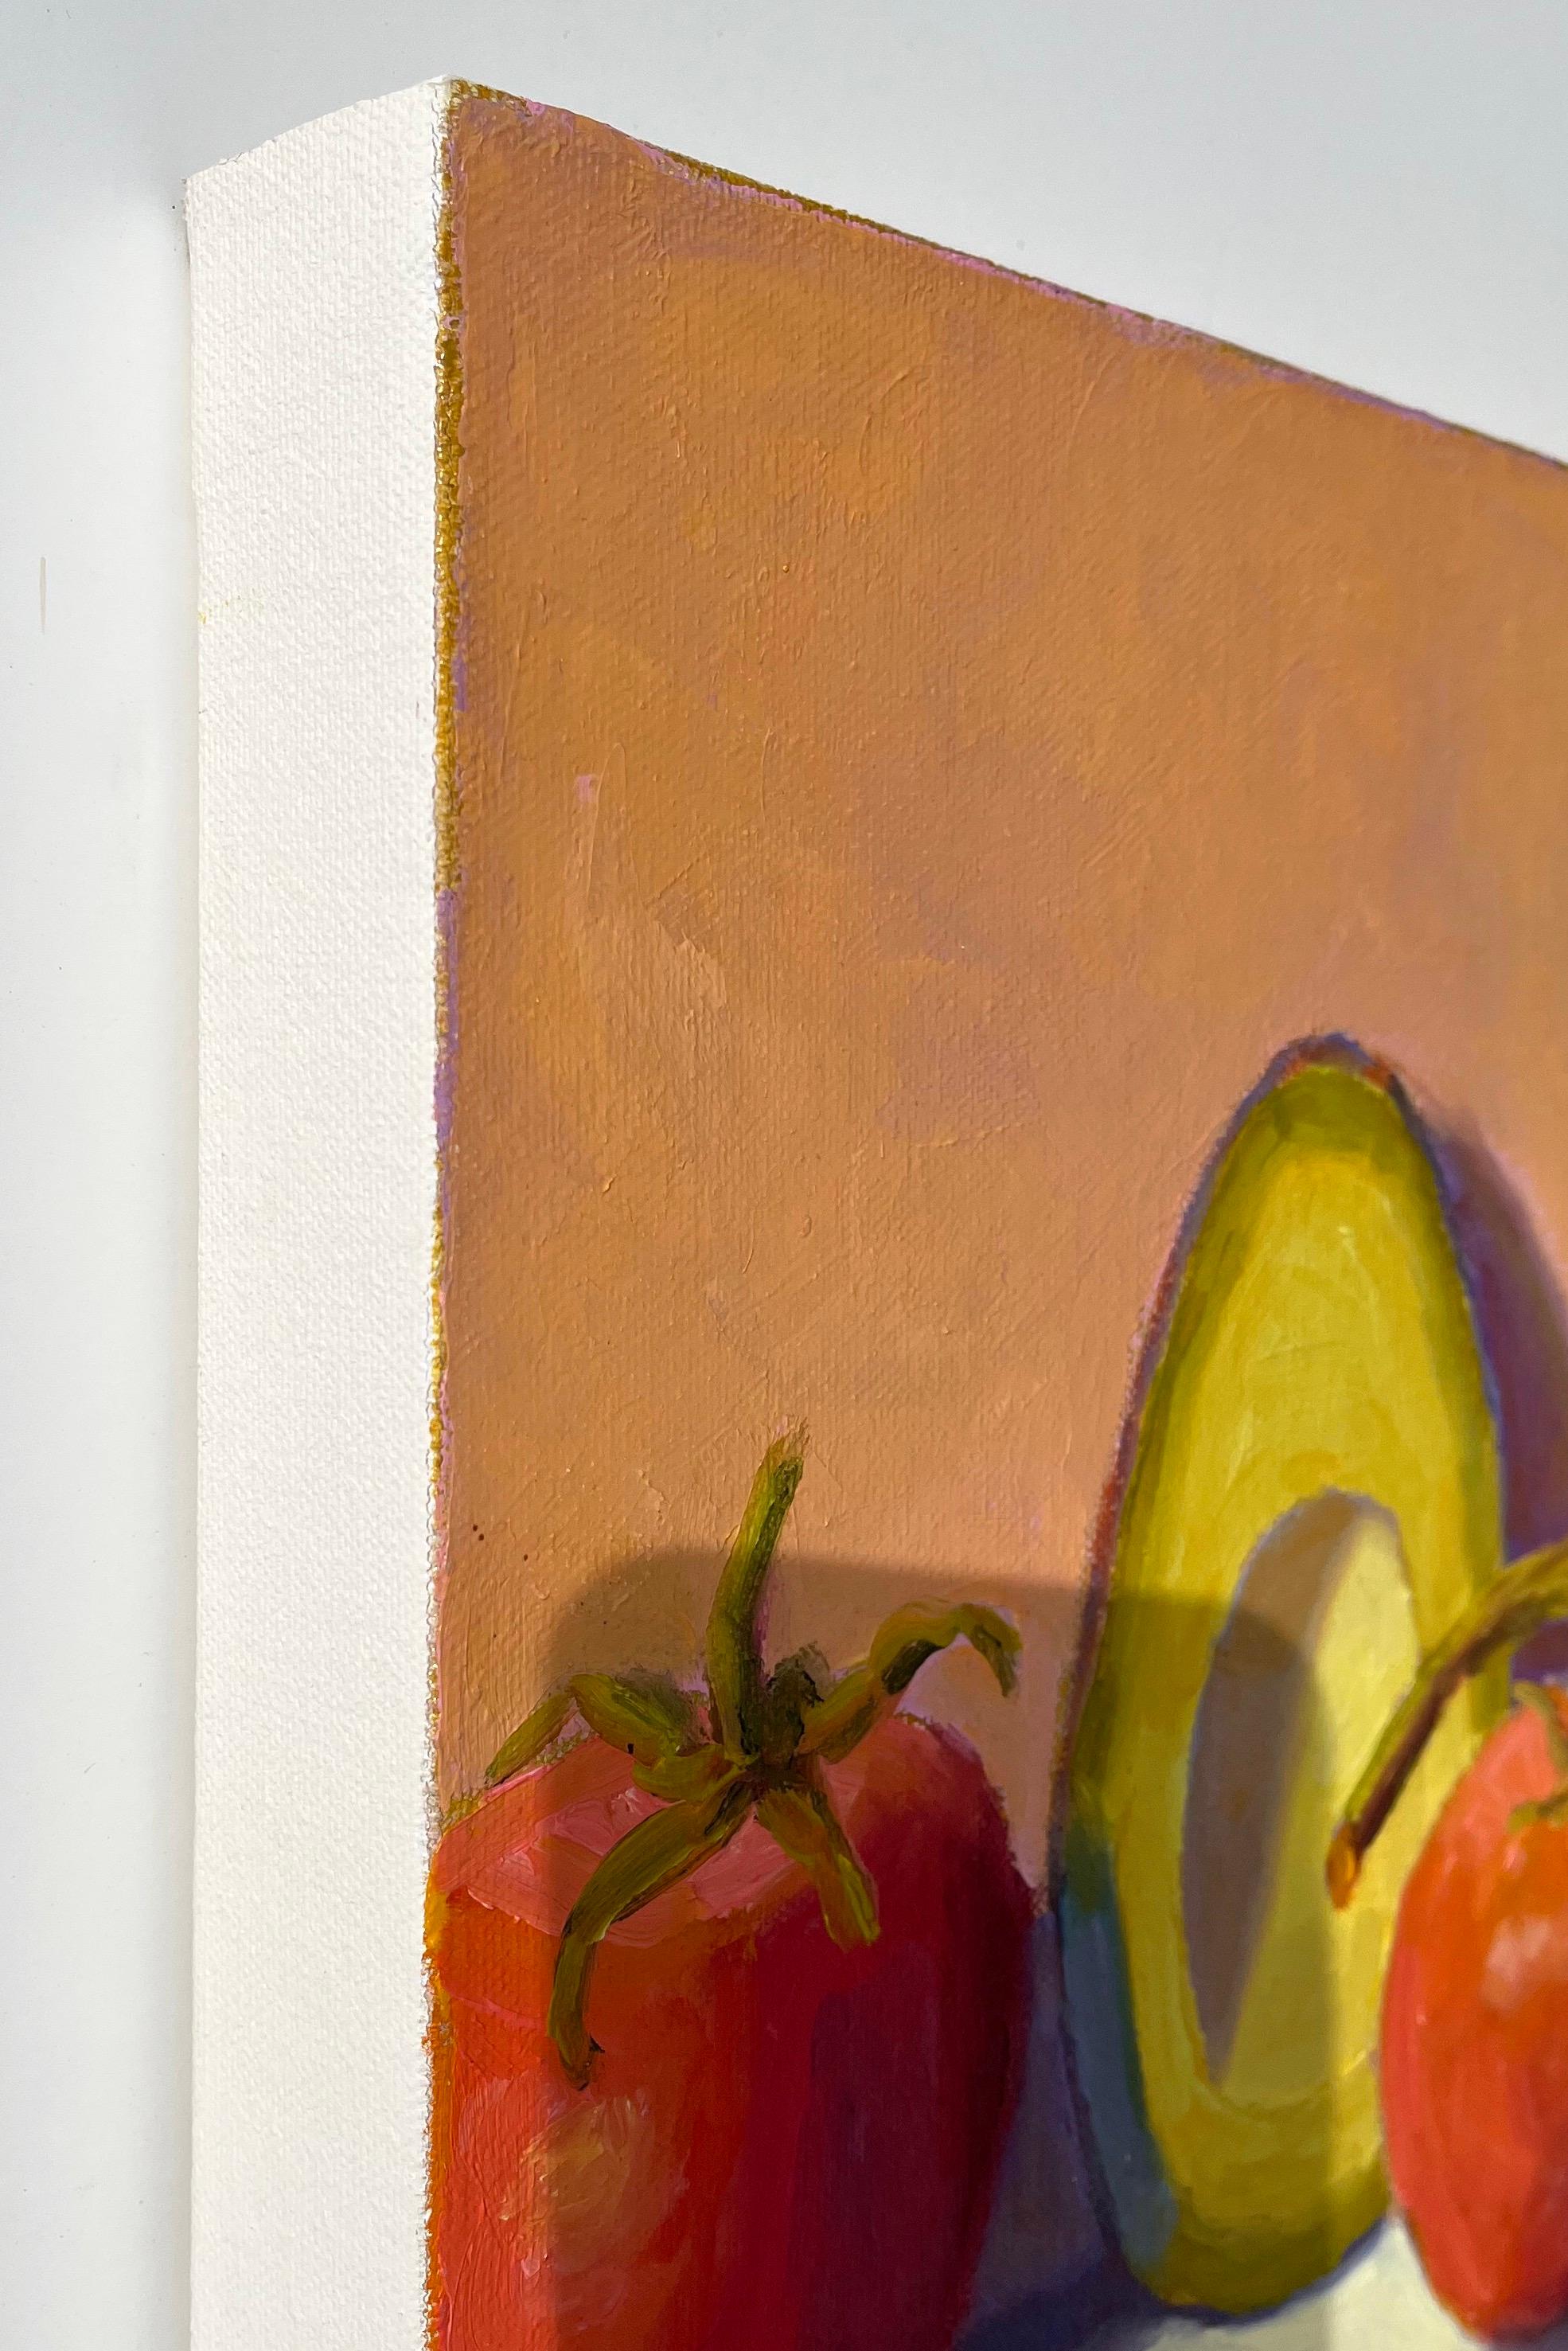 <p>Artist Comments<br>Artist Pat Doherty displays three vine tomatoes and a sliced avocado resting on a shelf. Her delectable oil paintings draw on her experience as a former commercial art director and designer. She seeks out her subjects at